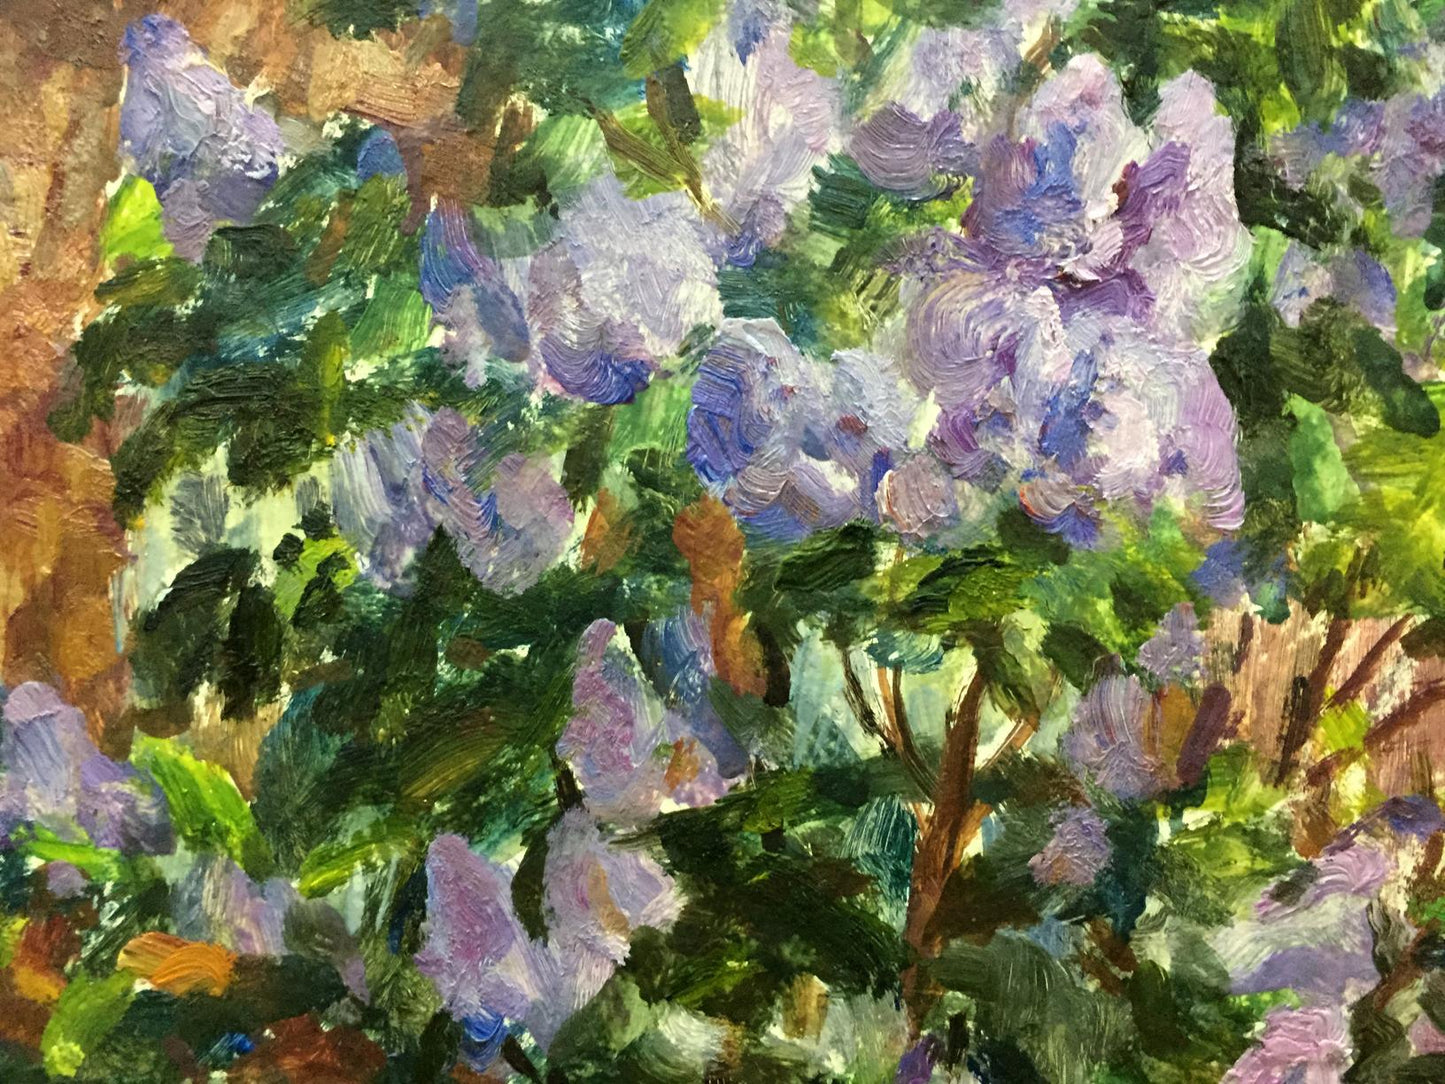 Lilac bush near Ivan Feodosievich Dziuban's home depicted in oil painting